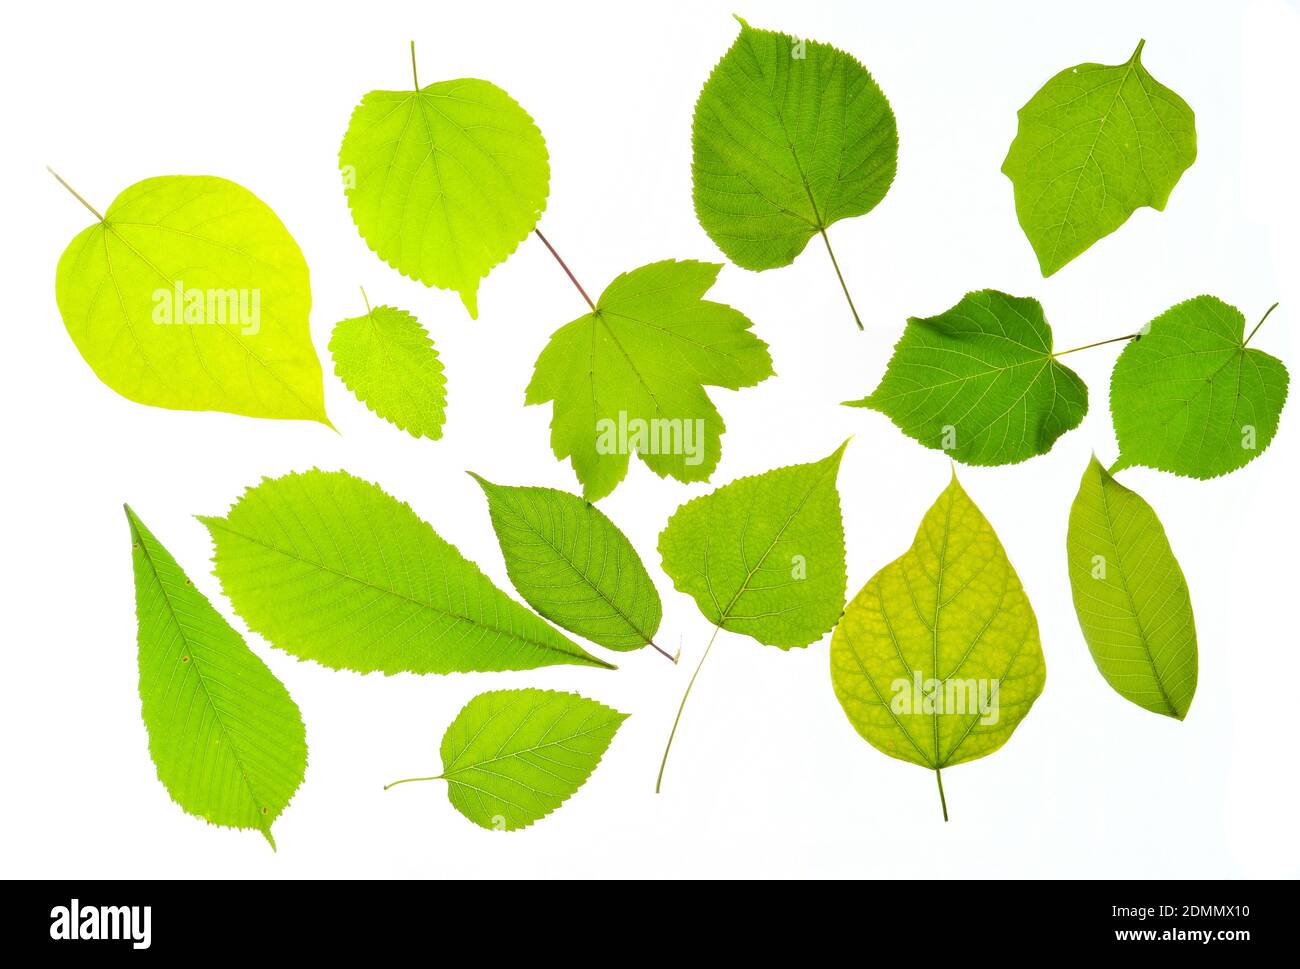 Variety of types of green leaves isolated on a white background Stock Photo